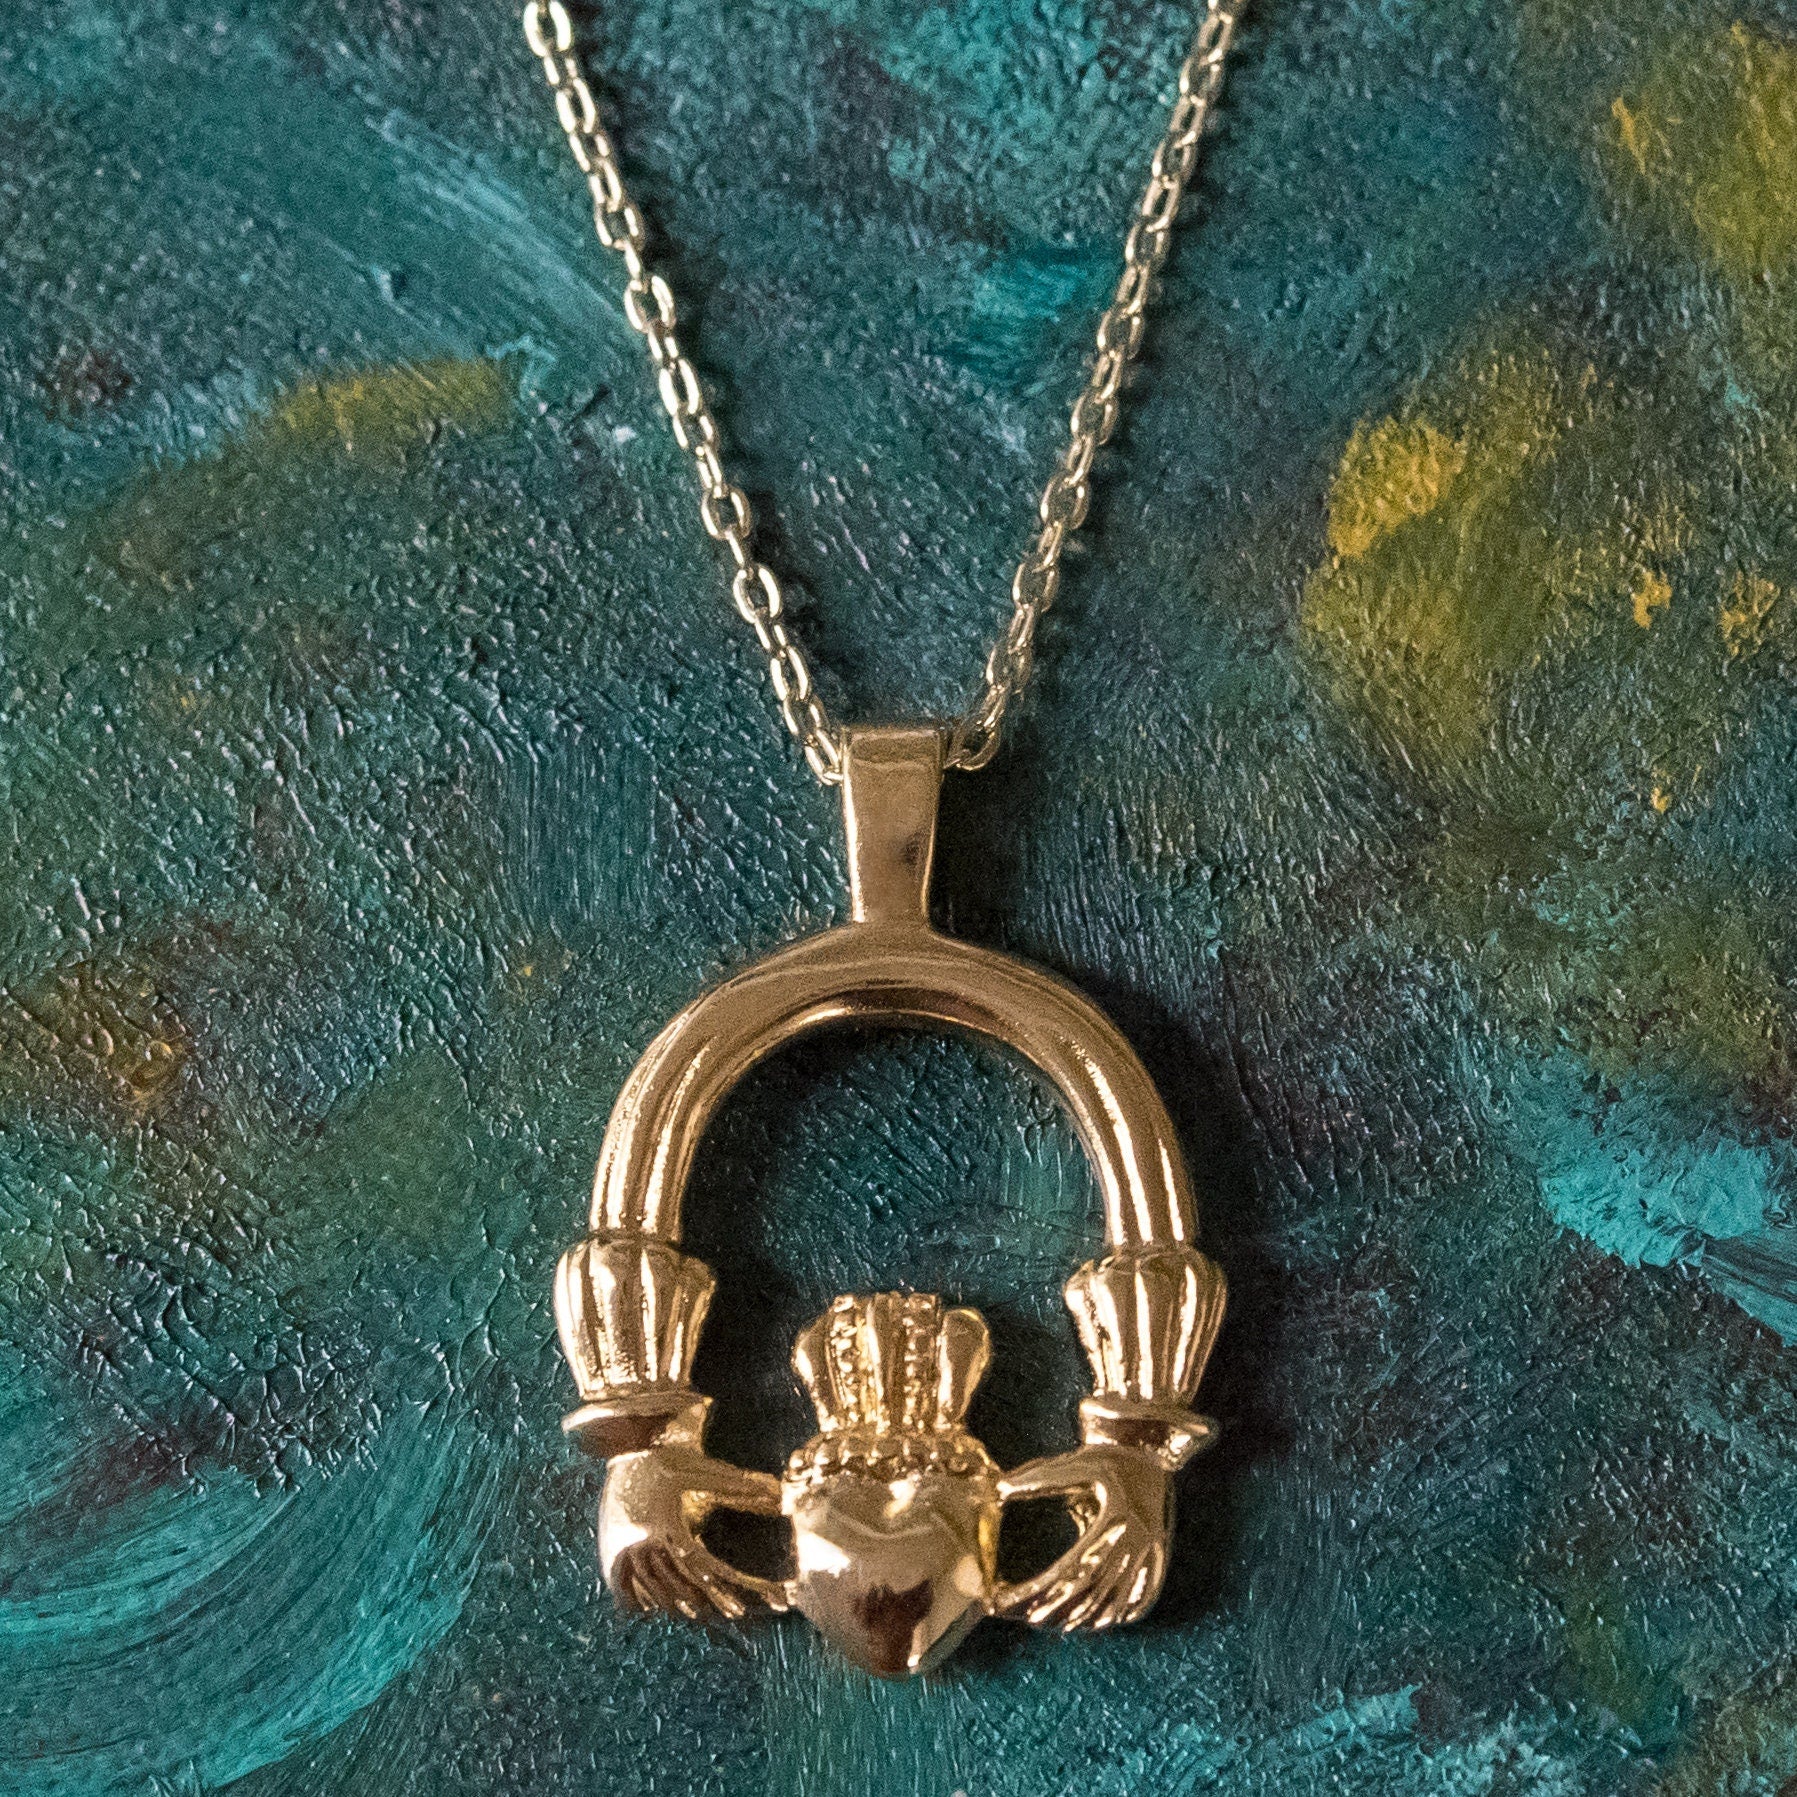 Vintage Claddagh Necklace Pendant Antique 18k Gold Made in the USA N1722 - Limited Stock - Never Worn